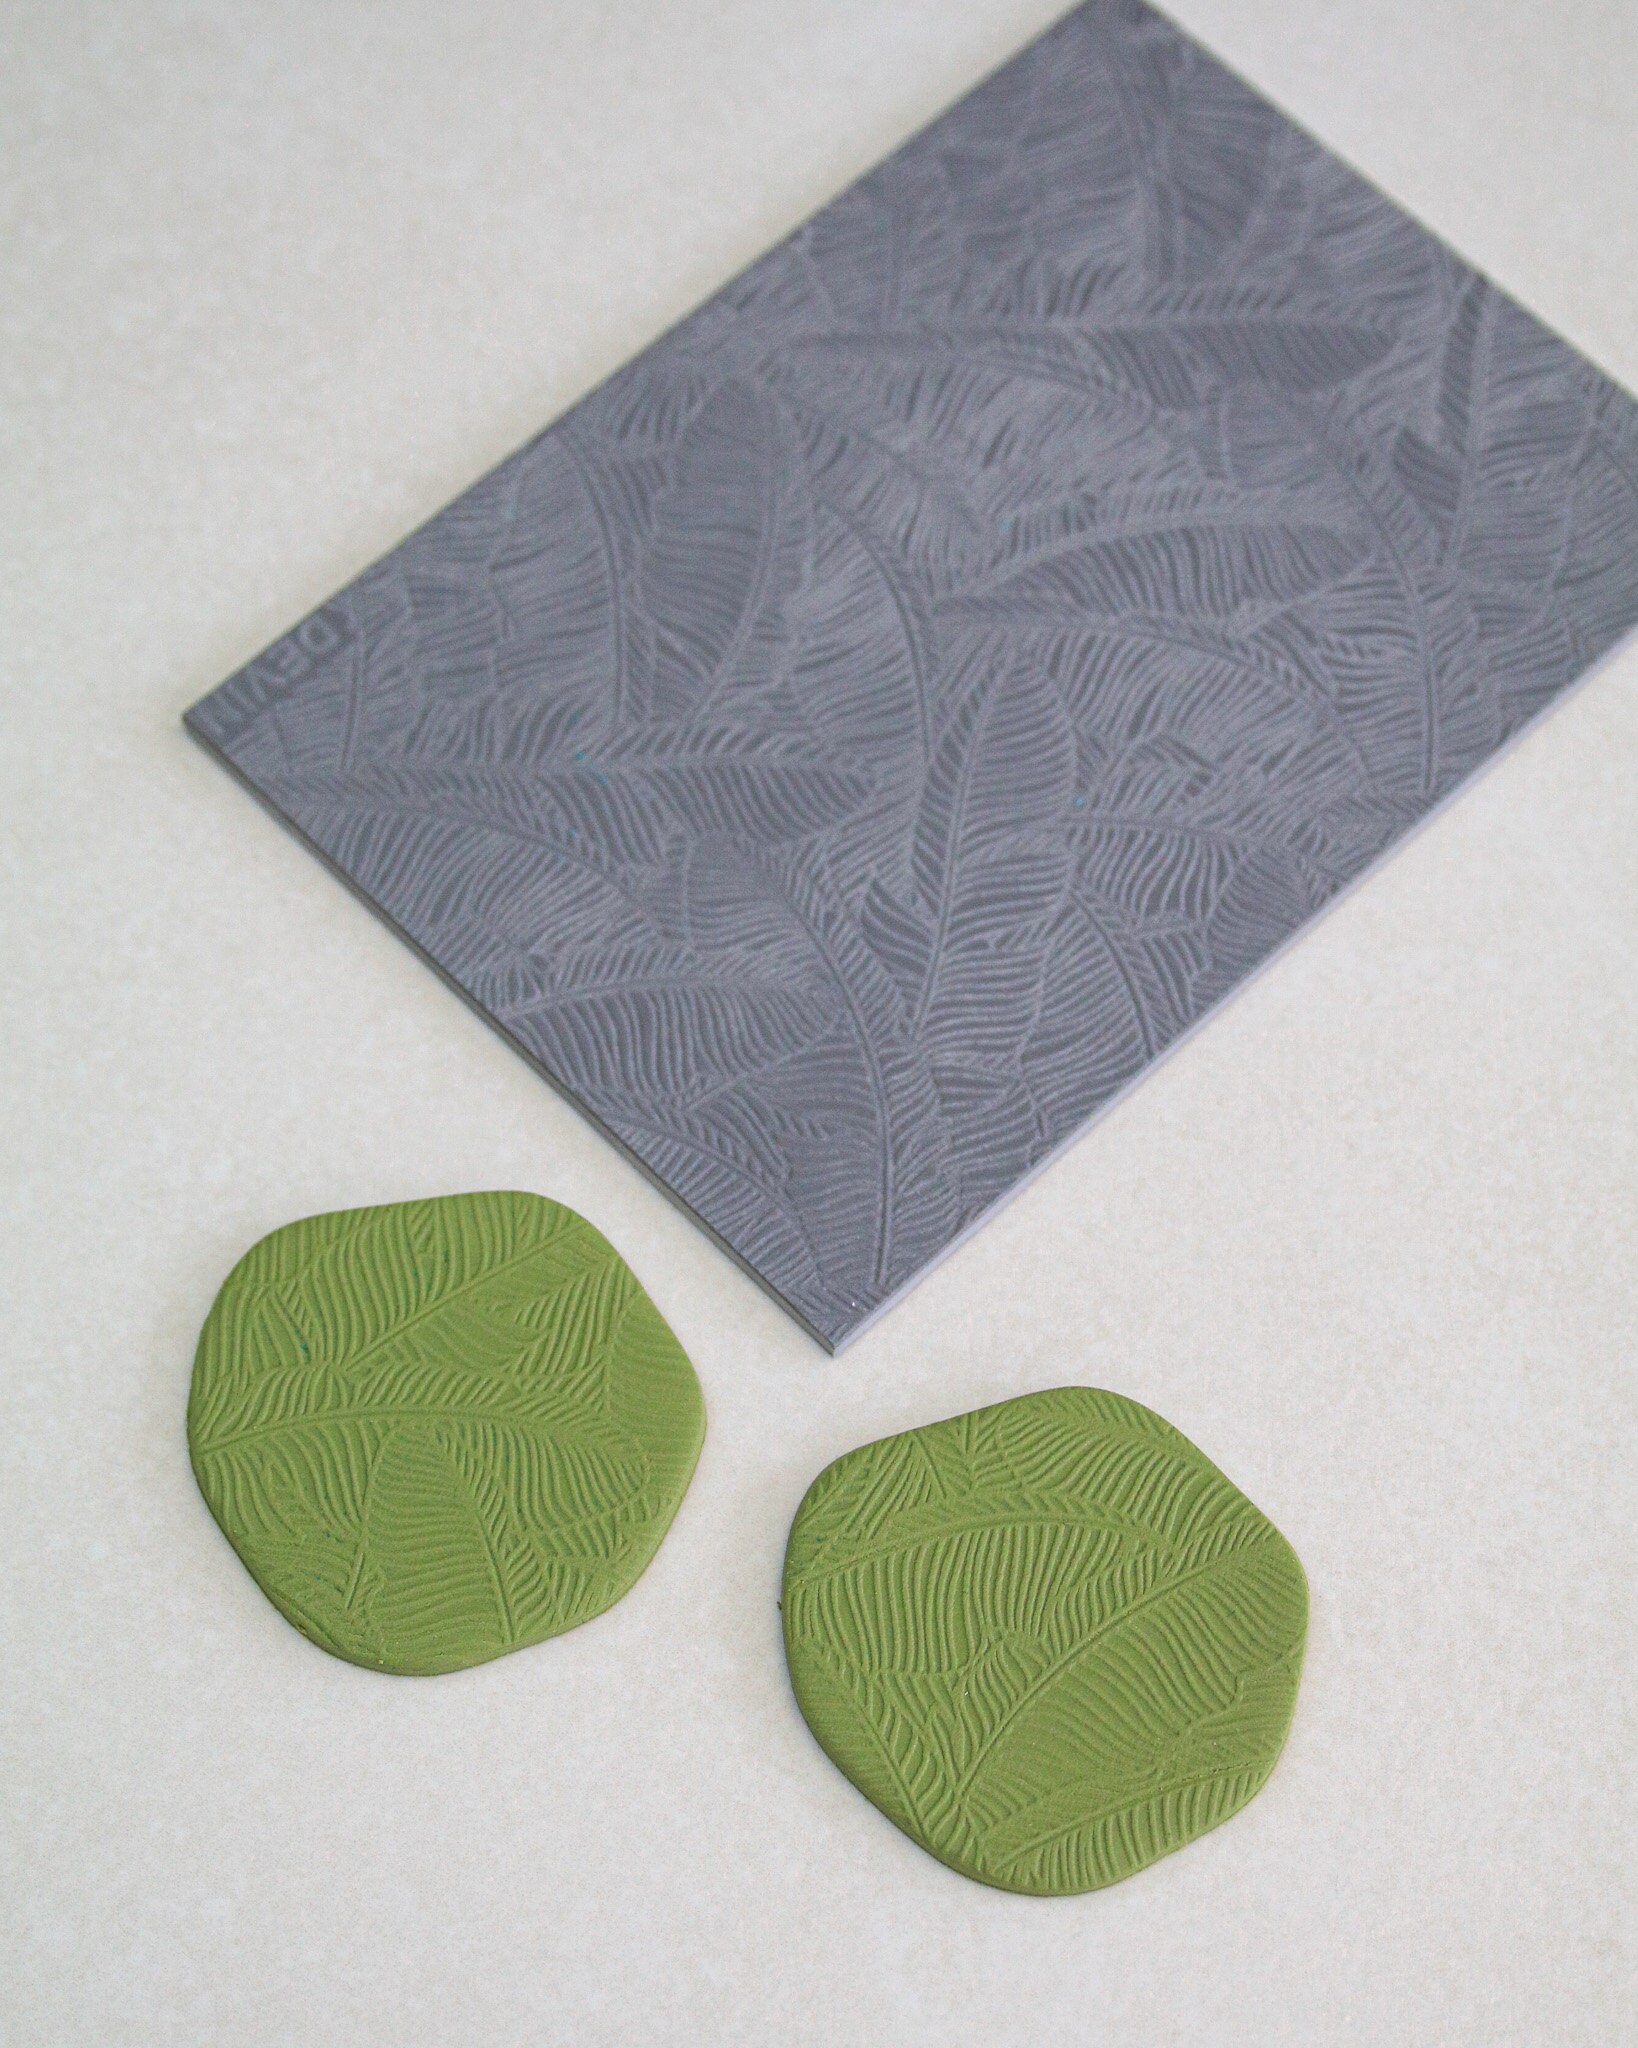 Polymer Clay Texture Sheet, Texture Mat For Polymer Clay